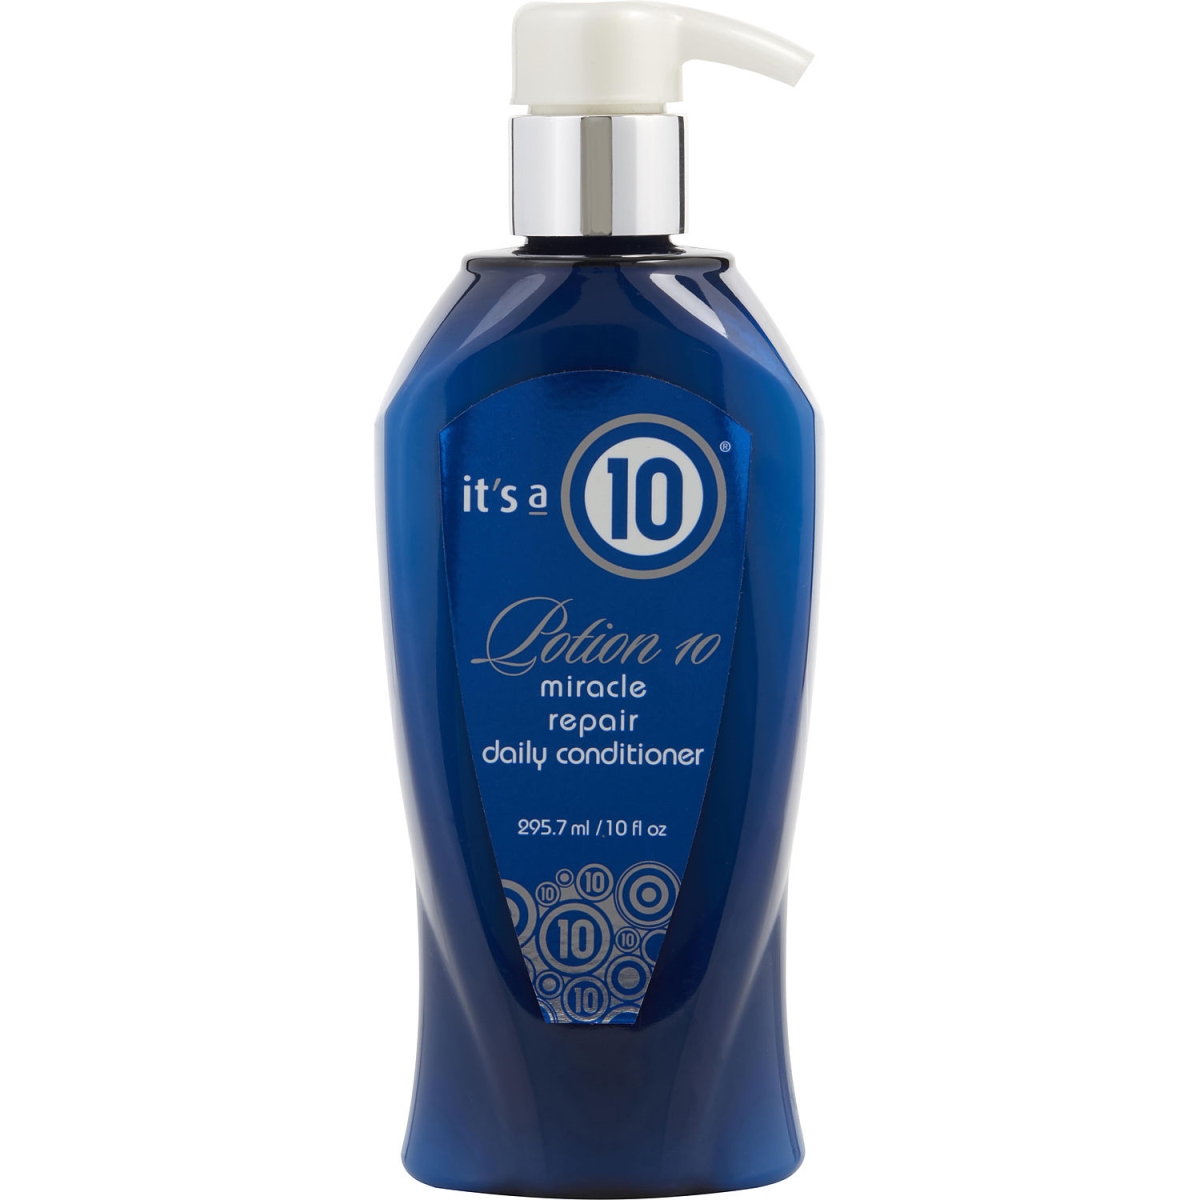 Its A 10 300059 10 Oz Unisex Potion 10 Miracle Repair Daily Hair Conditioner